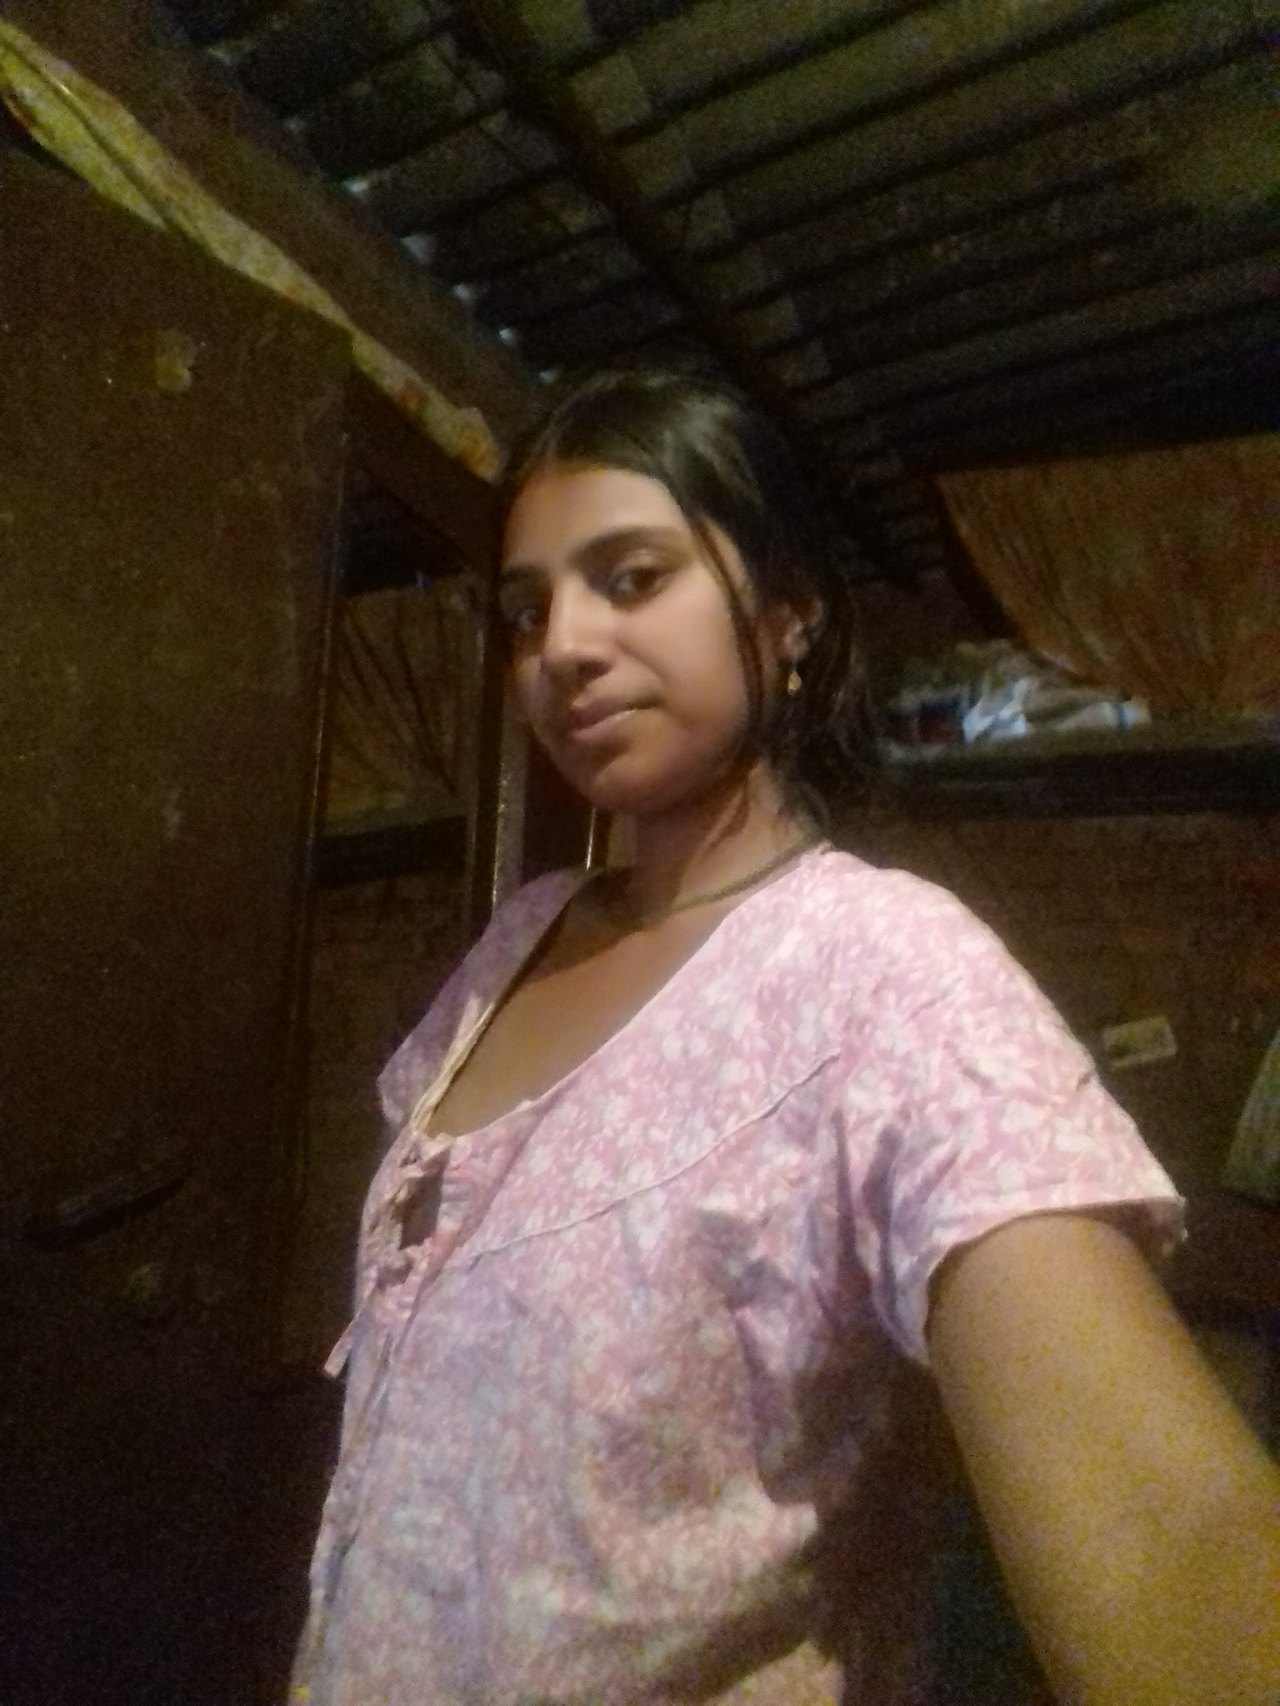 Indian North girl leaked pic